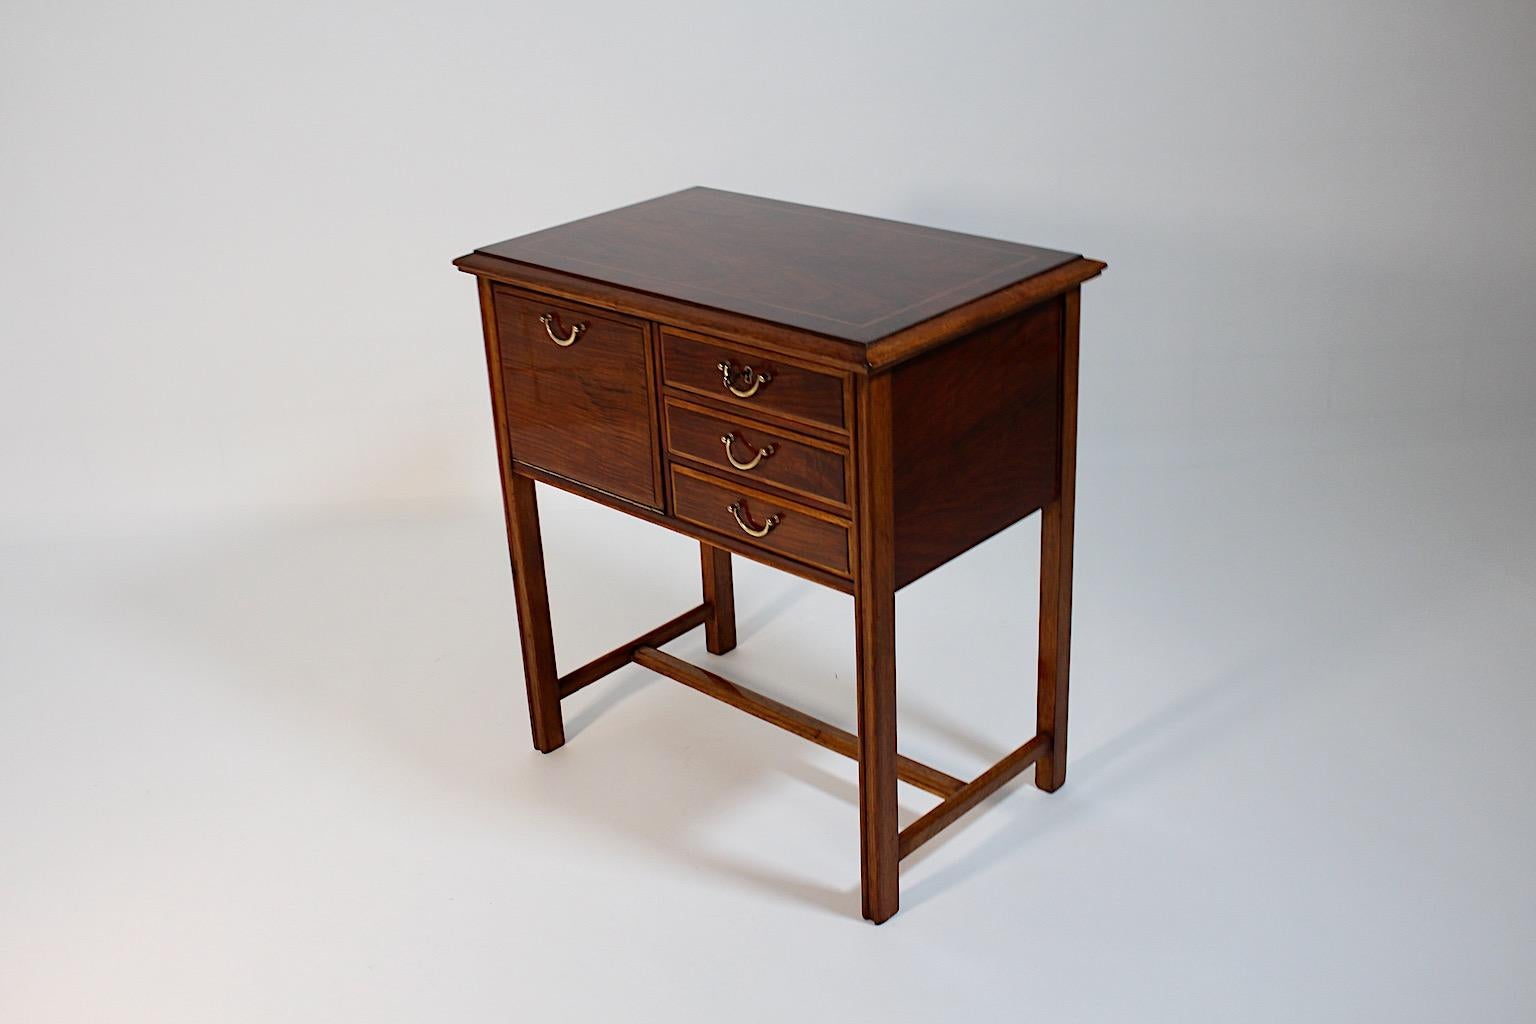 Art Deco freestanding vintage commodes, chest or desk from oak, walnut and brass attributed to Josef Frank circa 1927 Vienna.
An extraordinary chest, commodes or desk attributed to Josef Frank circa 1927 Vienna from oak and walnut inlays with maples